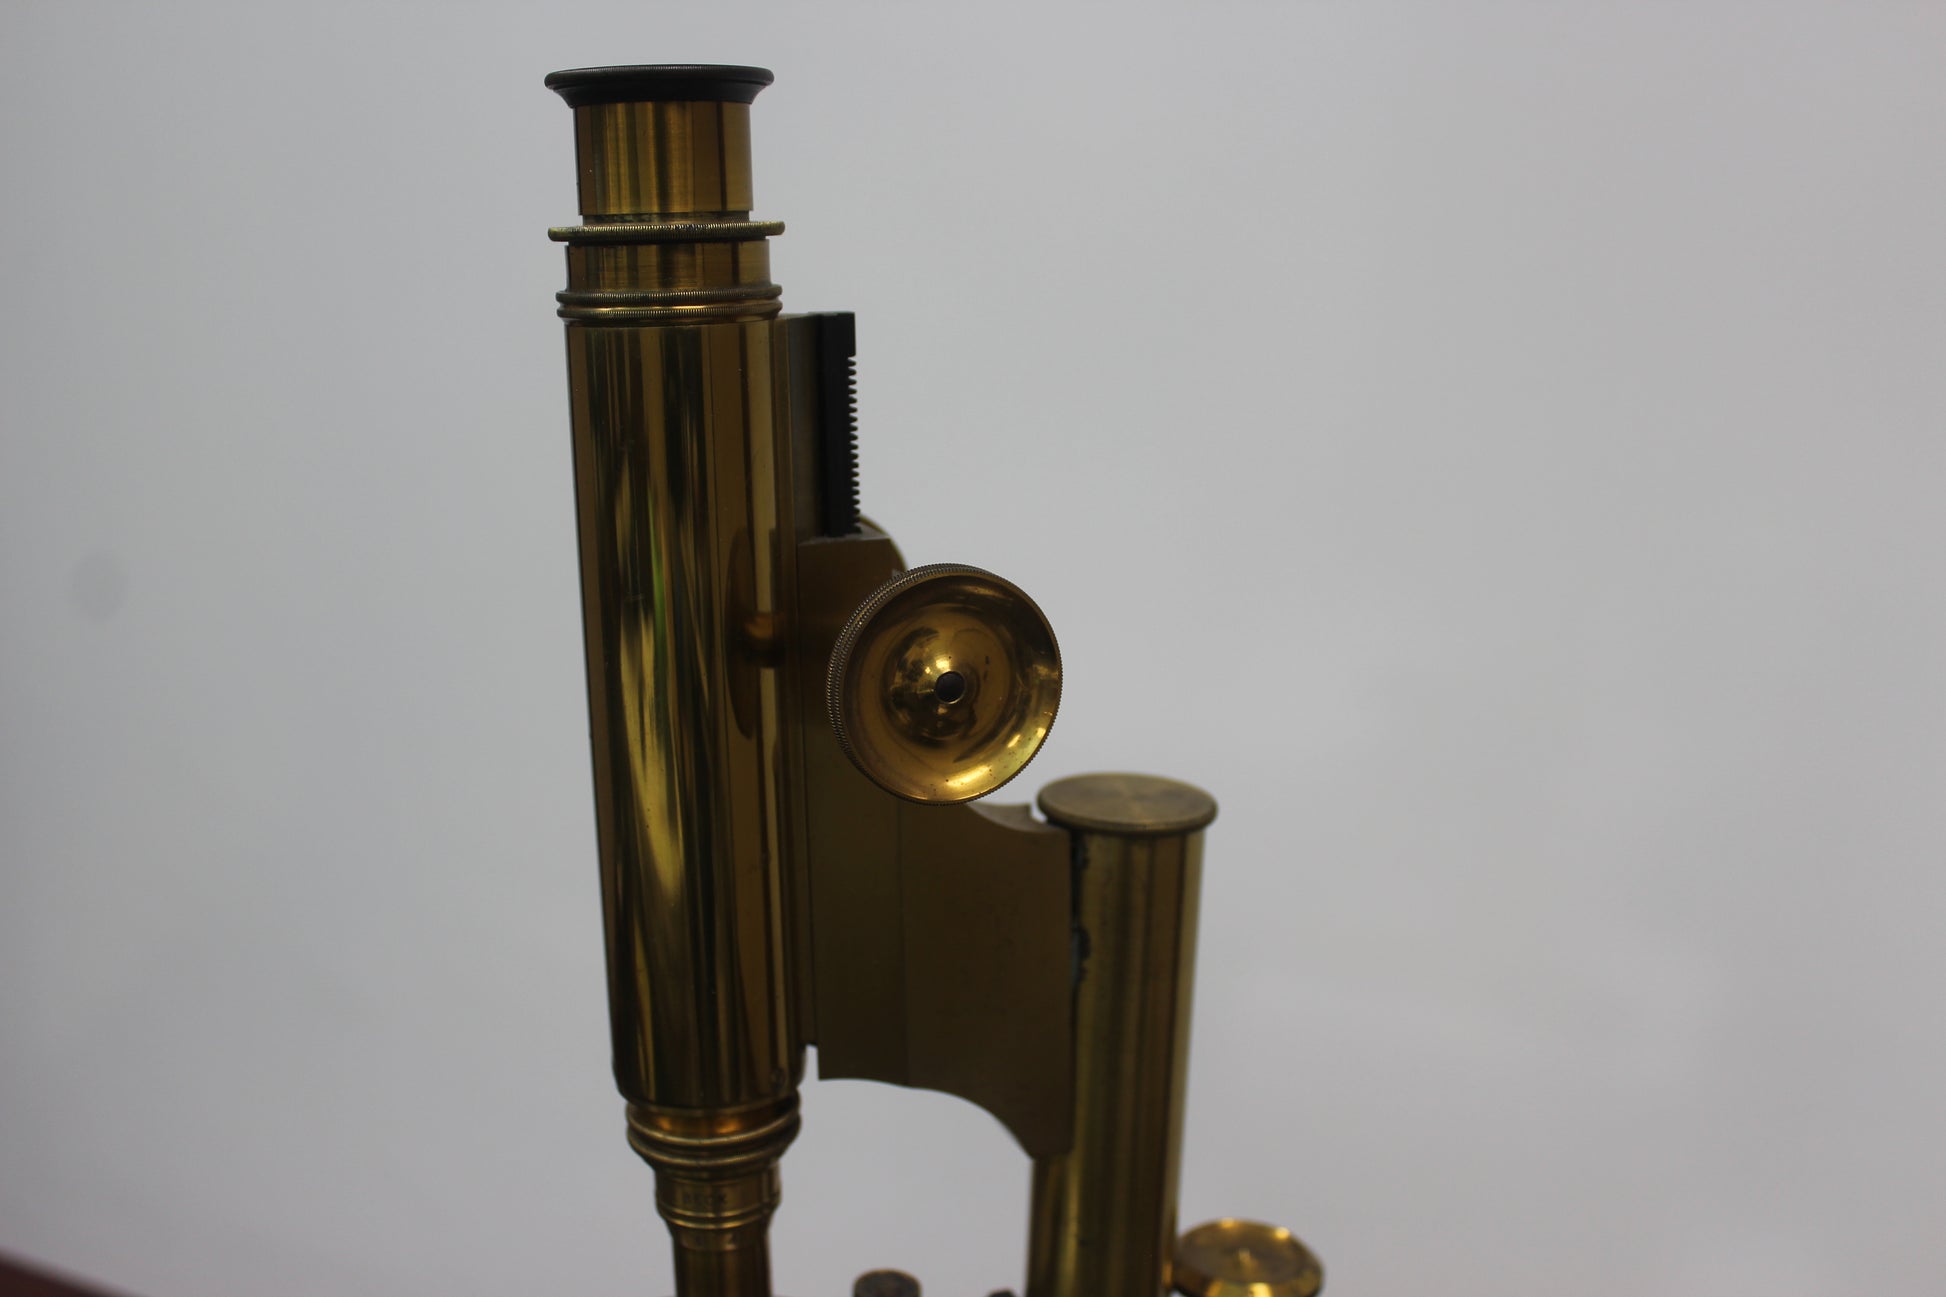 R & J. Beck Antique Brass Microscope (15667) - Sold by SILO Surplus